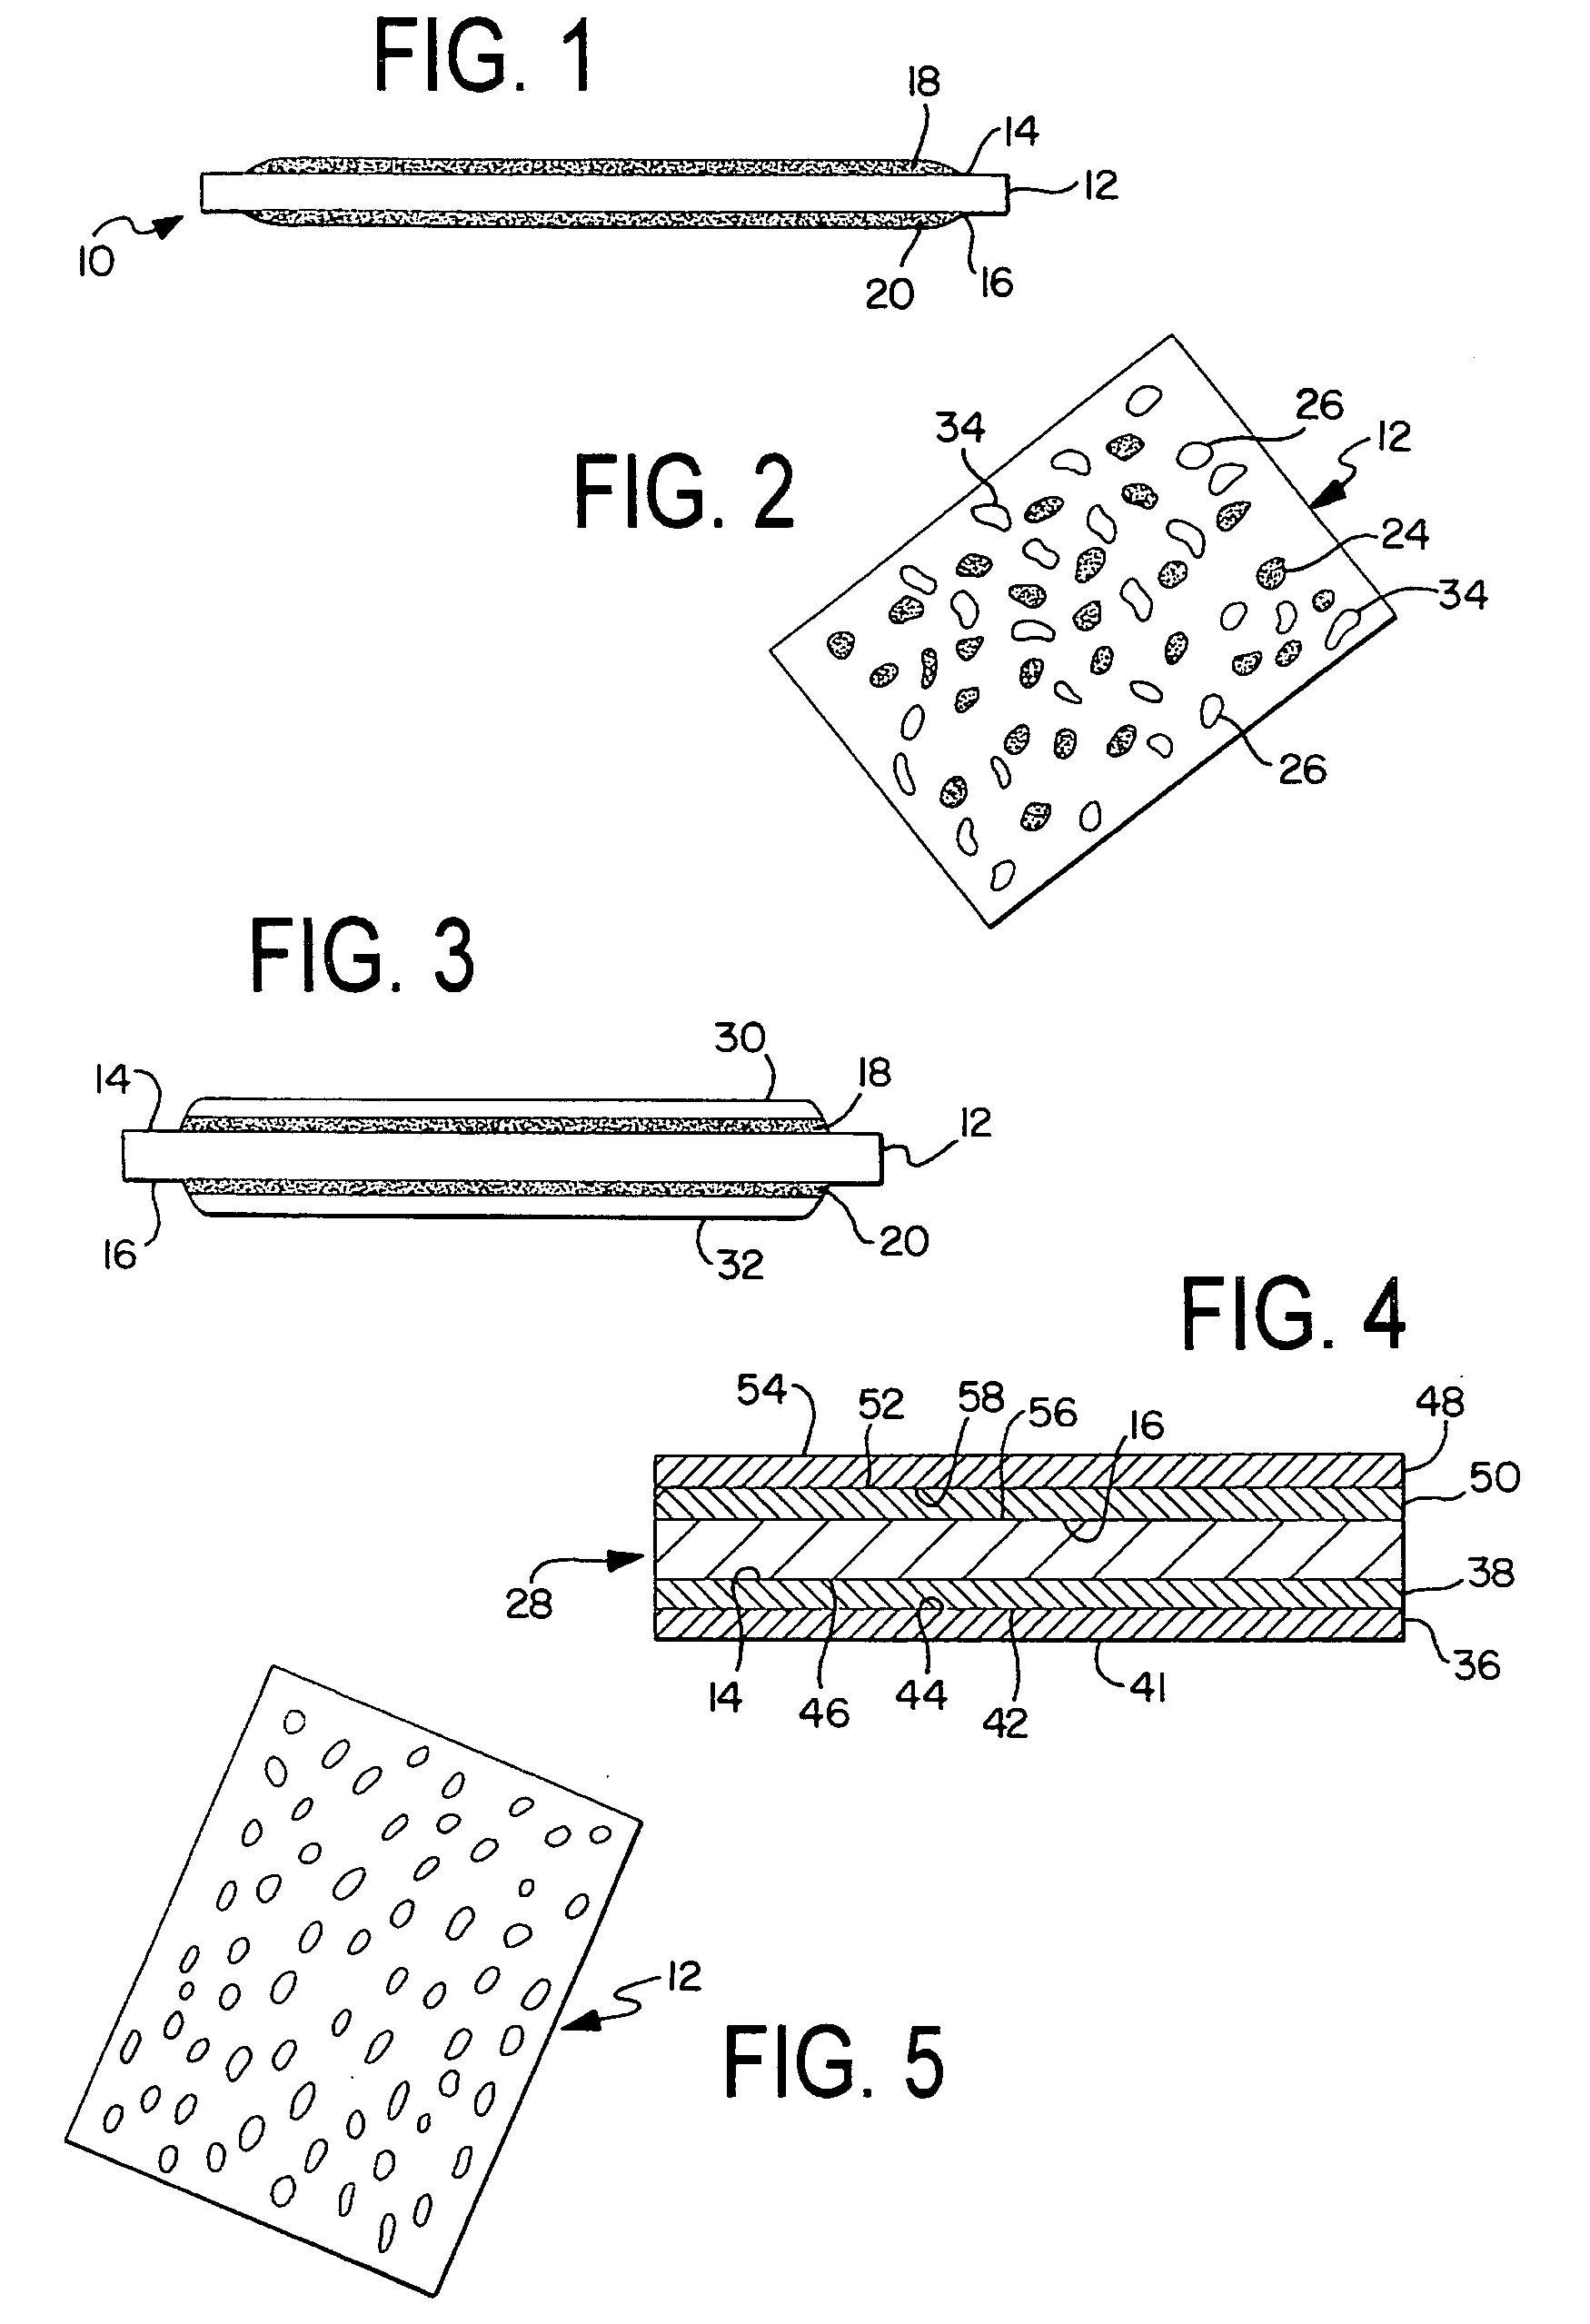 Adhesive-treated electrode separator and method of adhering an electrode thereto